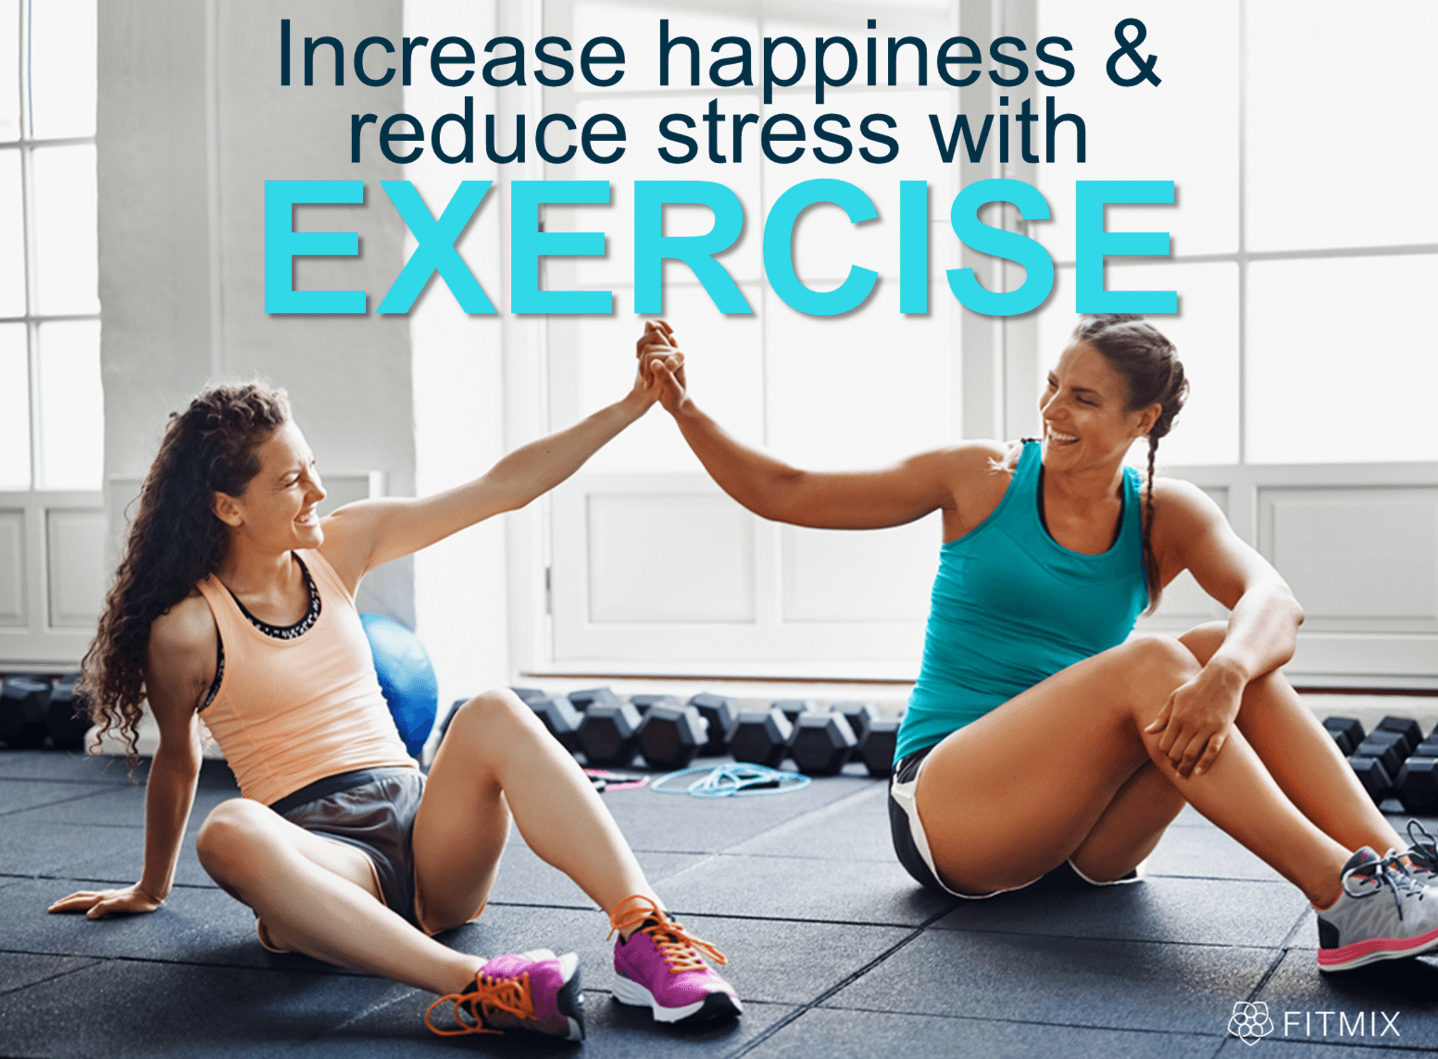 https://fitmixonline.com/assets/blogs_images/1586784284-Increase_happiness.png